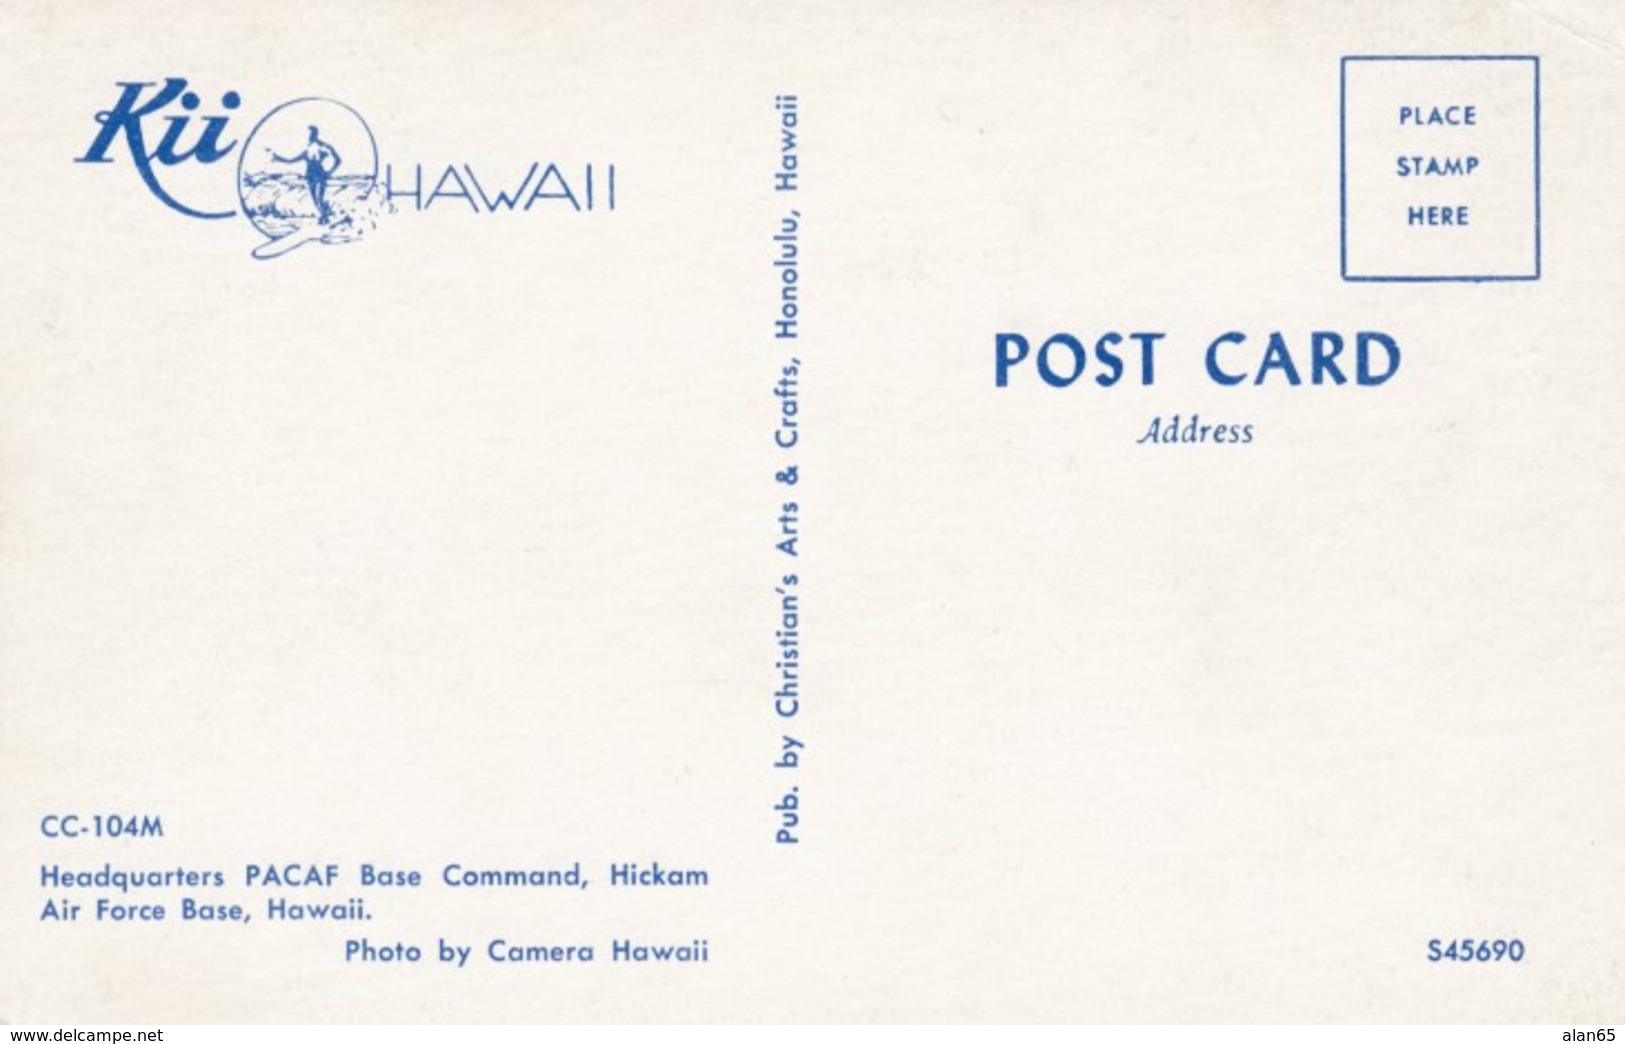 Hickam Air Force Base Hawaii, HQ For PACAF Base Command, Planes On Tarmac, Buildings, C1950s Vintage Postcard - Barracks